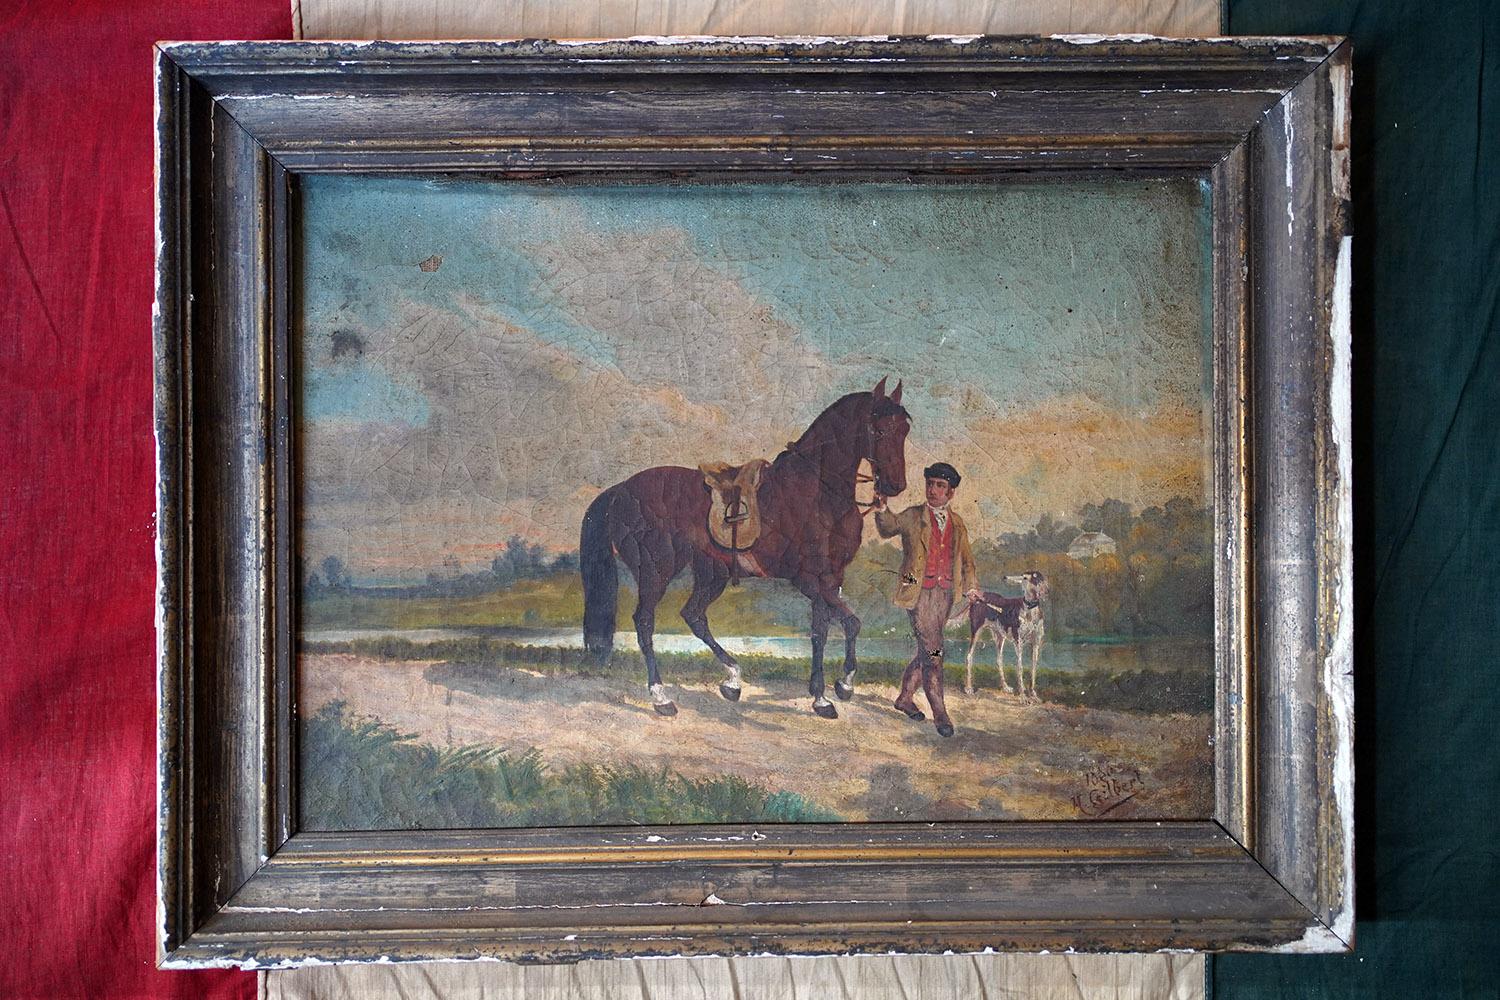 In entirely original condition, the provincial oil on canvas painting of a youth with a stallion and hunting dog amidst classic rural French countryside walking upon a track by a river side, painted in the naïve style by a journeying Englishman, and